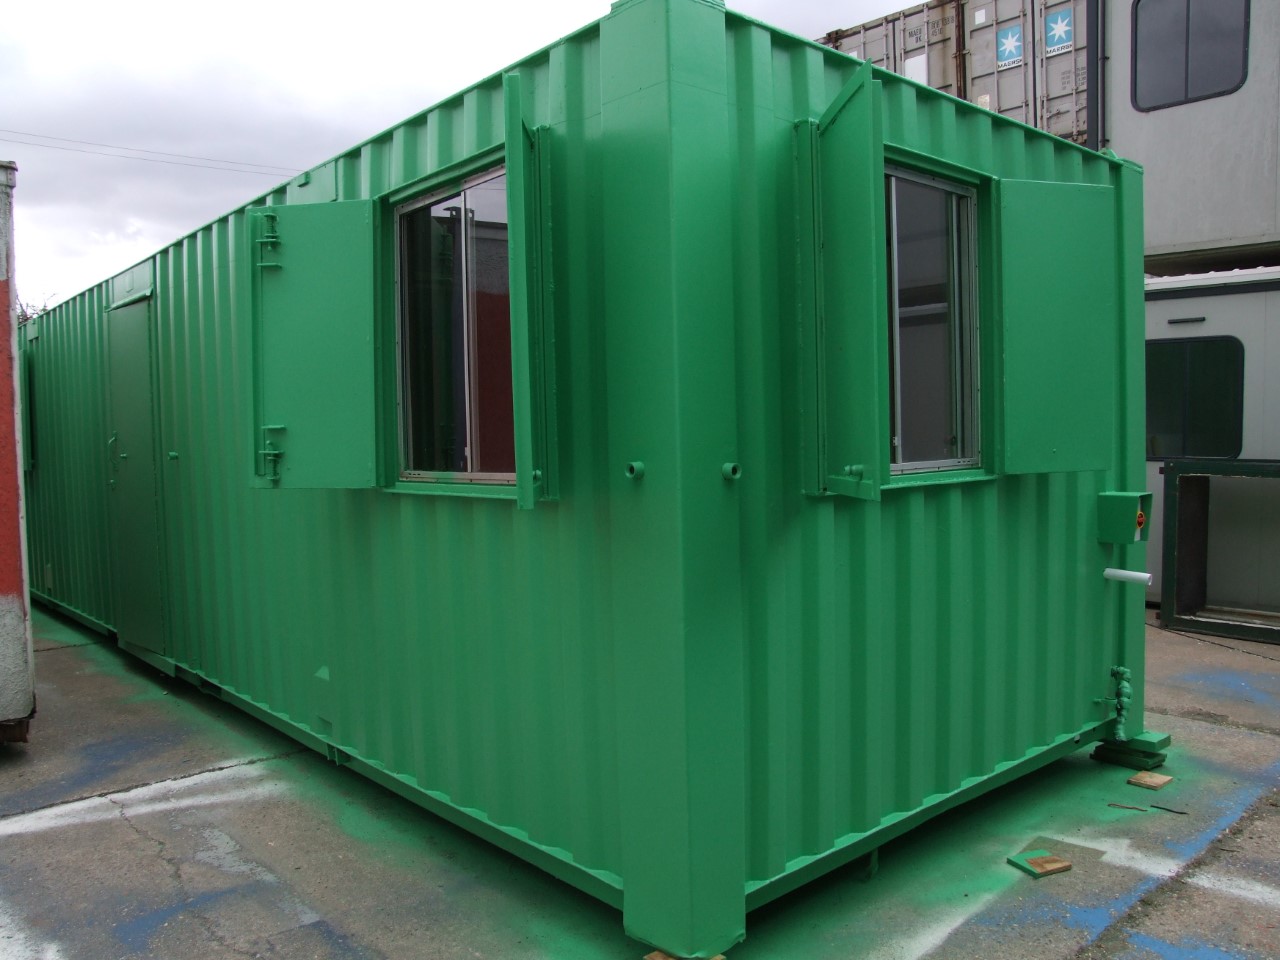 A used refurbished green site cabin